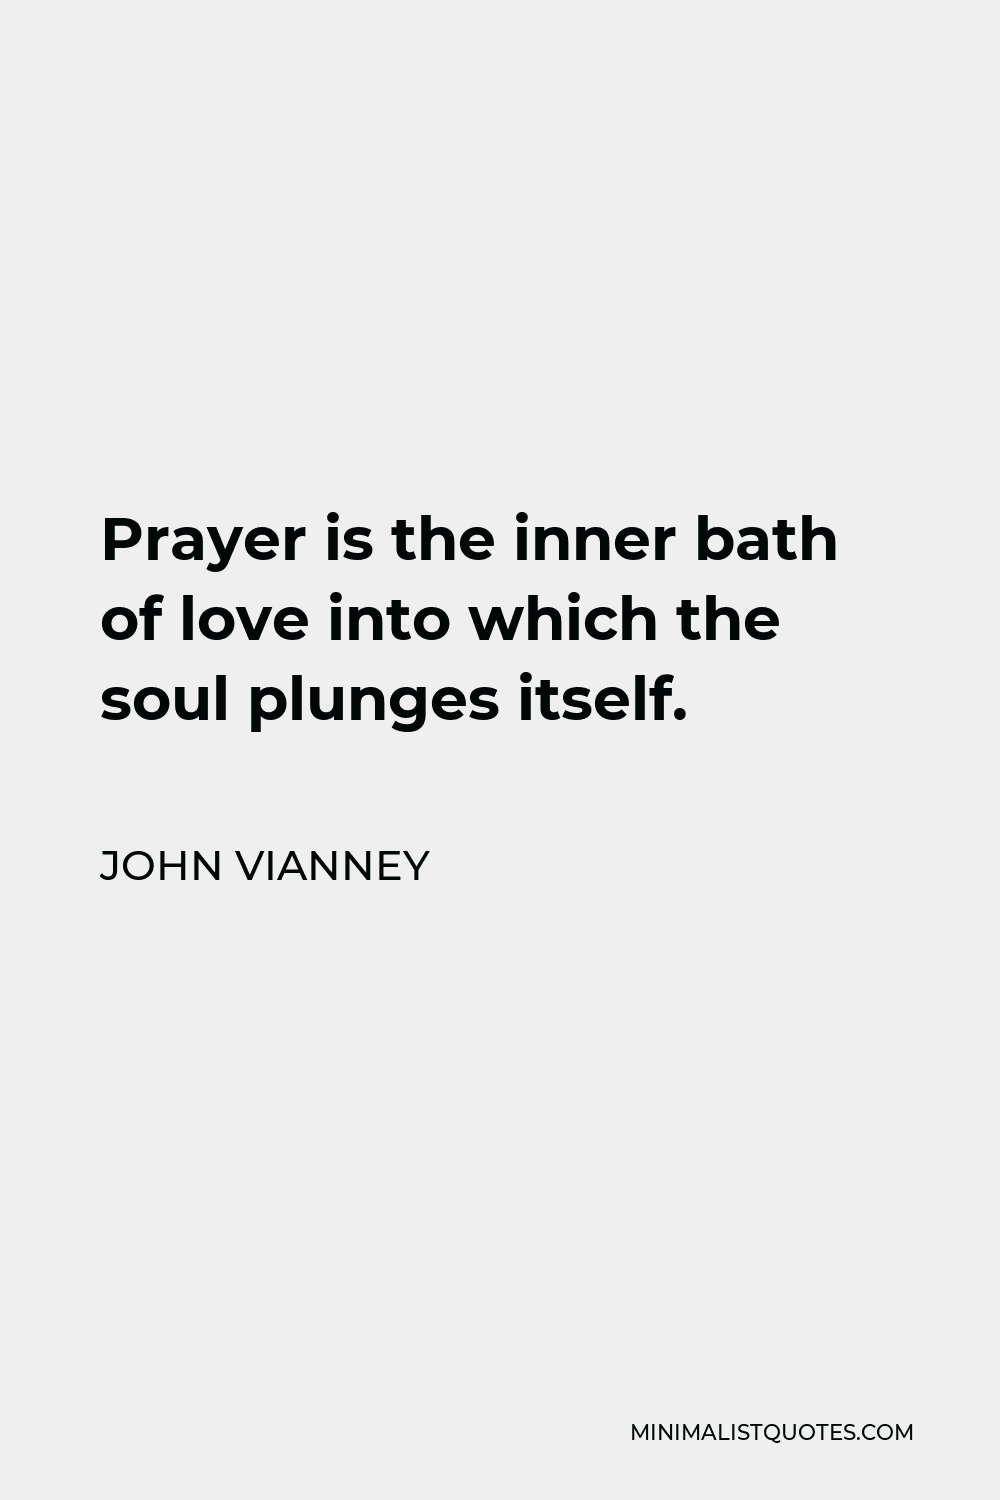 John Vianney Quote - Prayer is the inner bath of love into which the soul plunges itself.